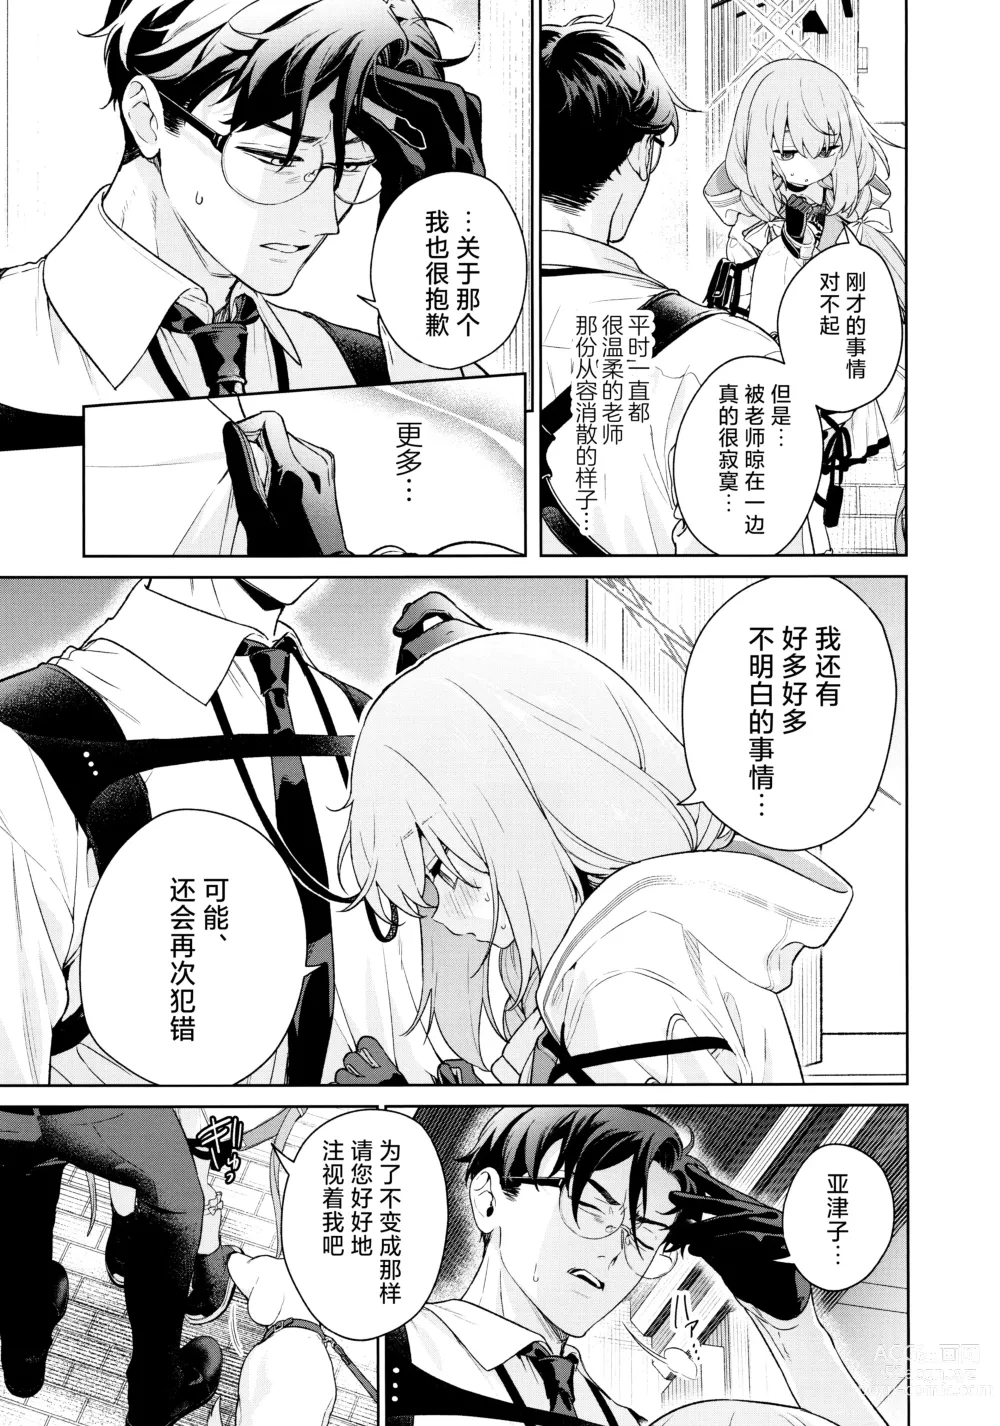 Page 9 of doujinshi 请教(管)教我